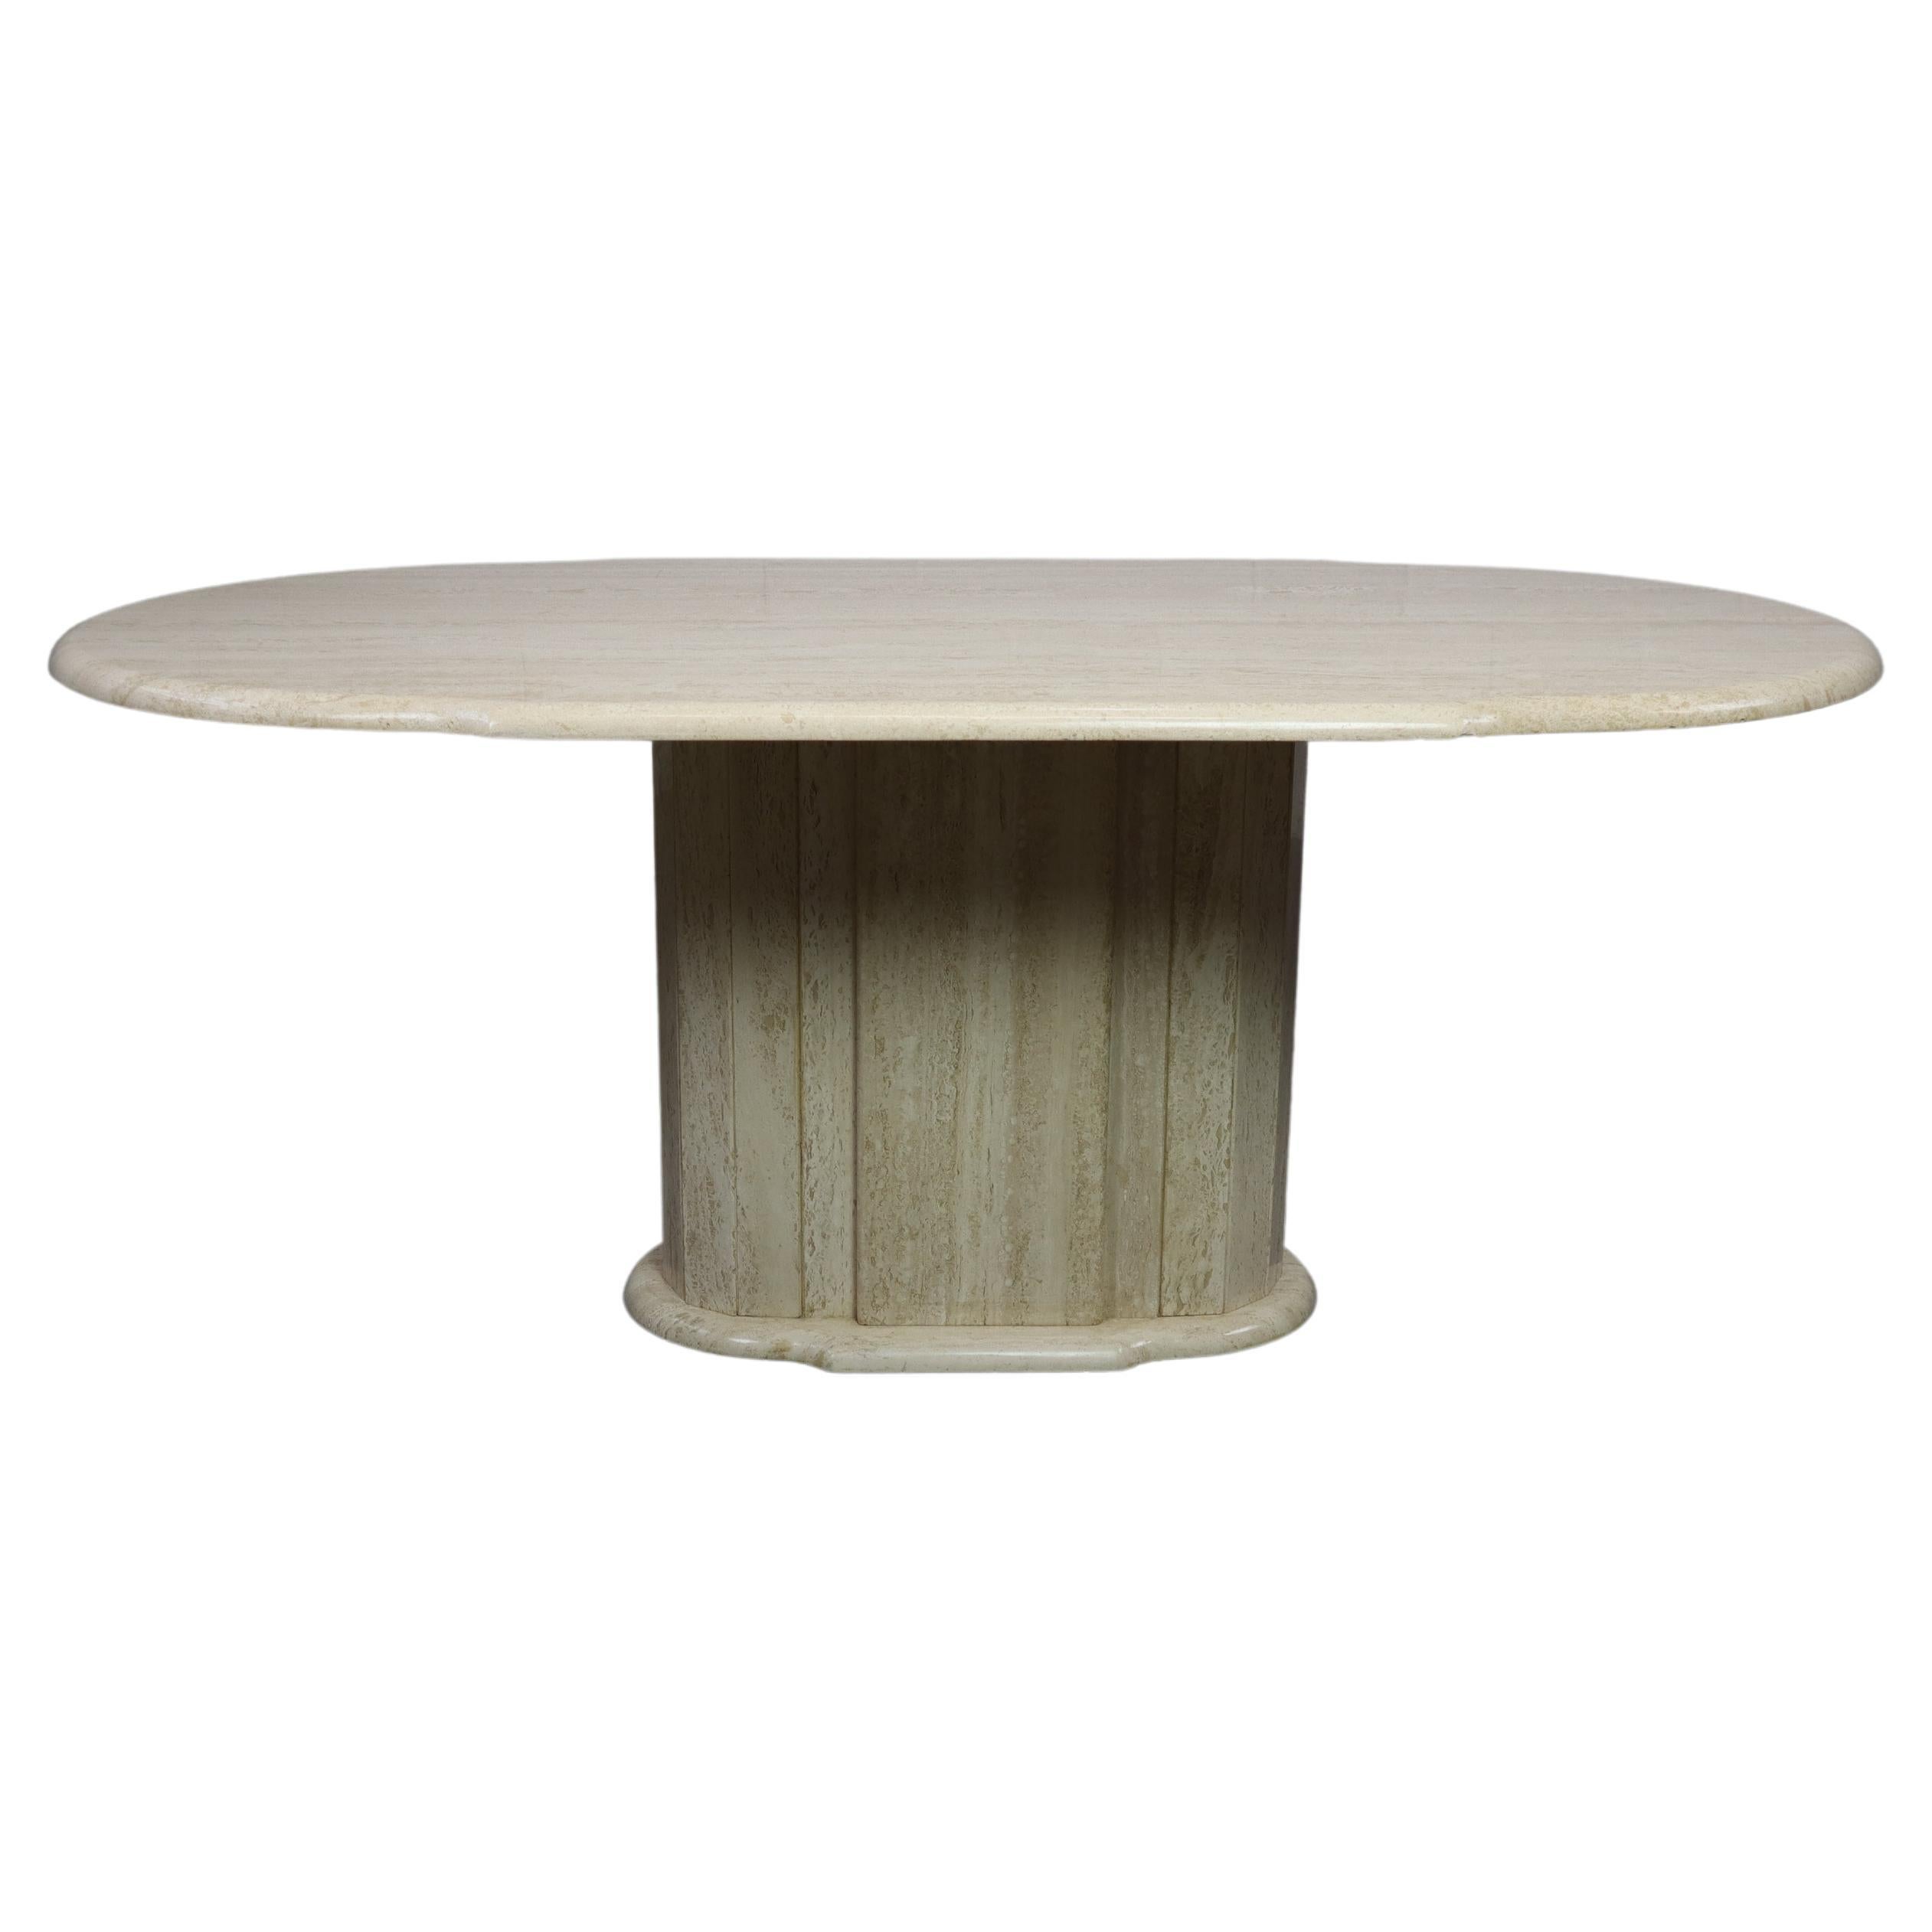 Vintage Travertine dining table, Italy 1970's